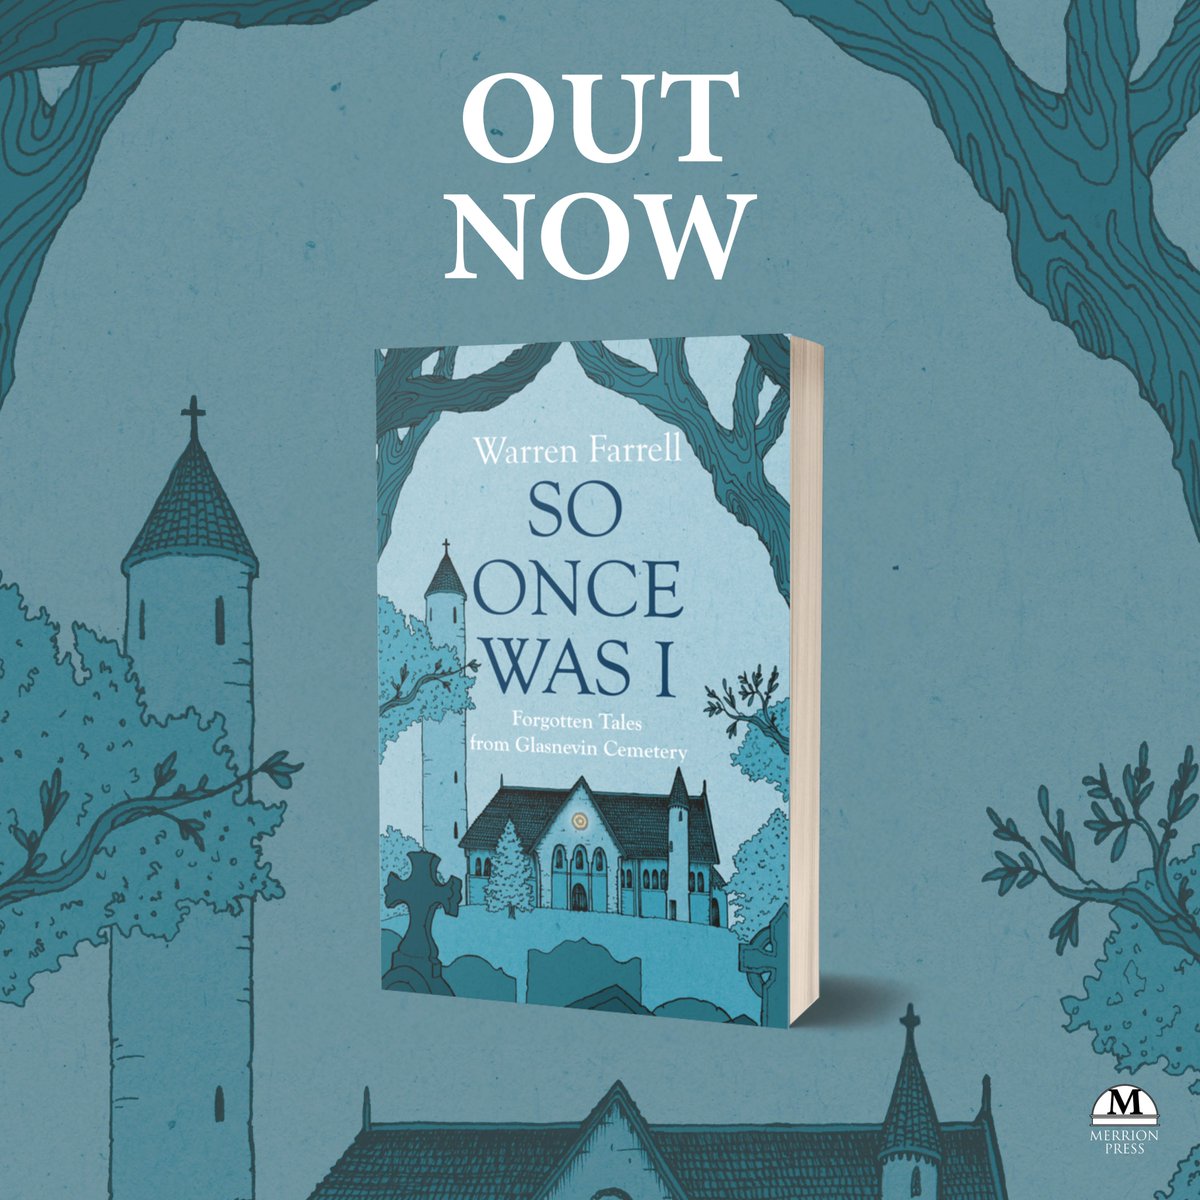 Have you picked up your copy of So Once Was I yet? The ‘faithful departed’, as James Joyce referred to the cemetery’s population, are reanimated in this book through vivid re-tellings of their stories. Available online & in all good bookshops! @WarrenJJF